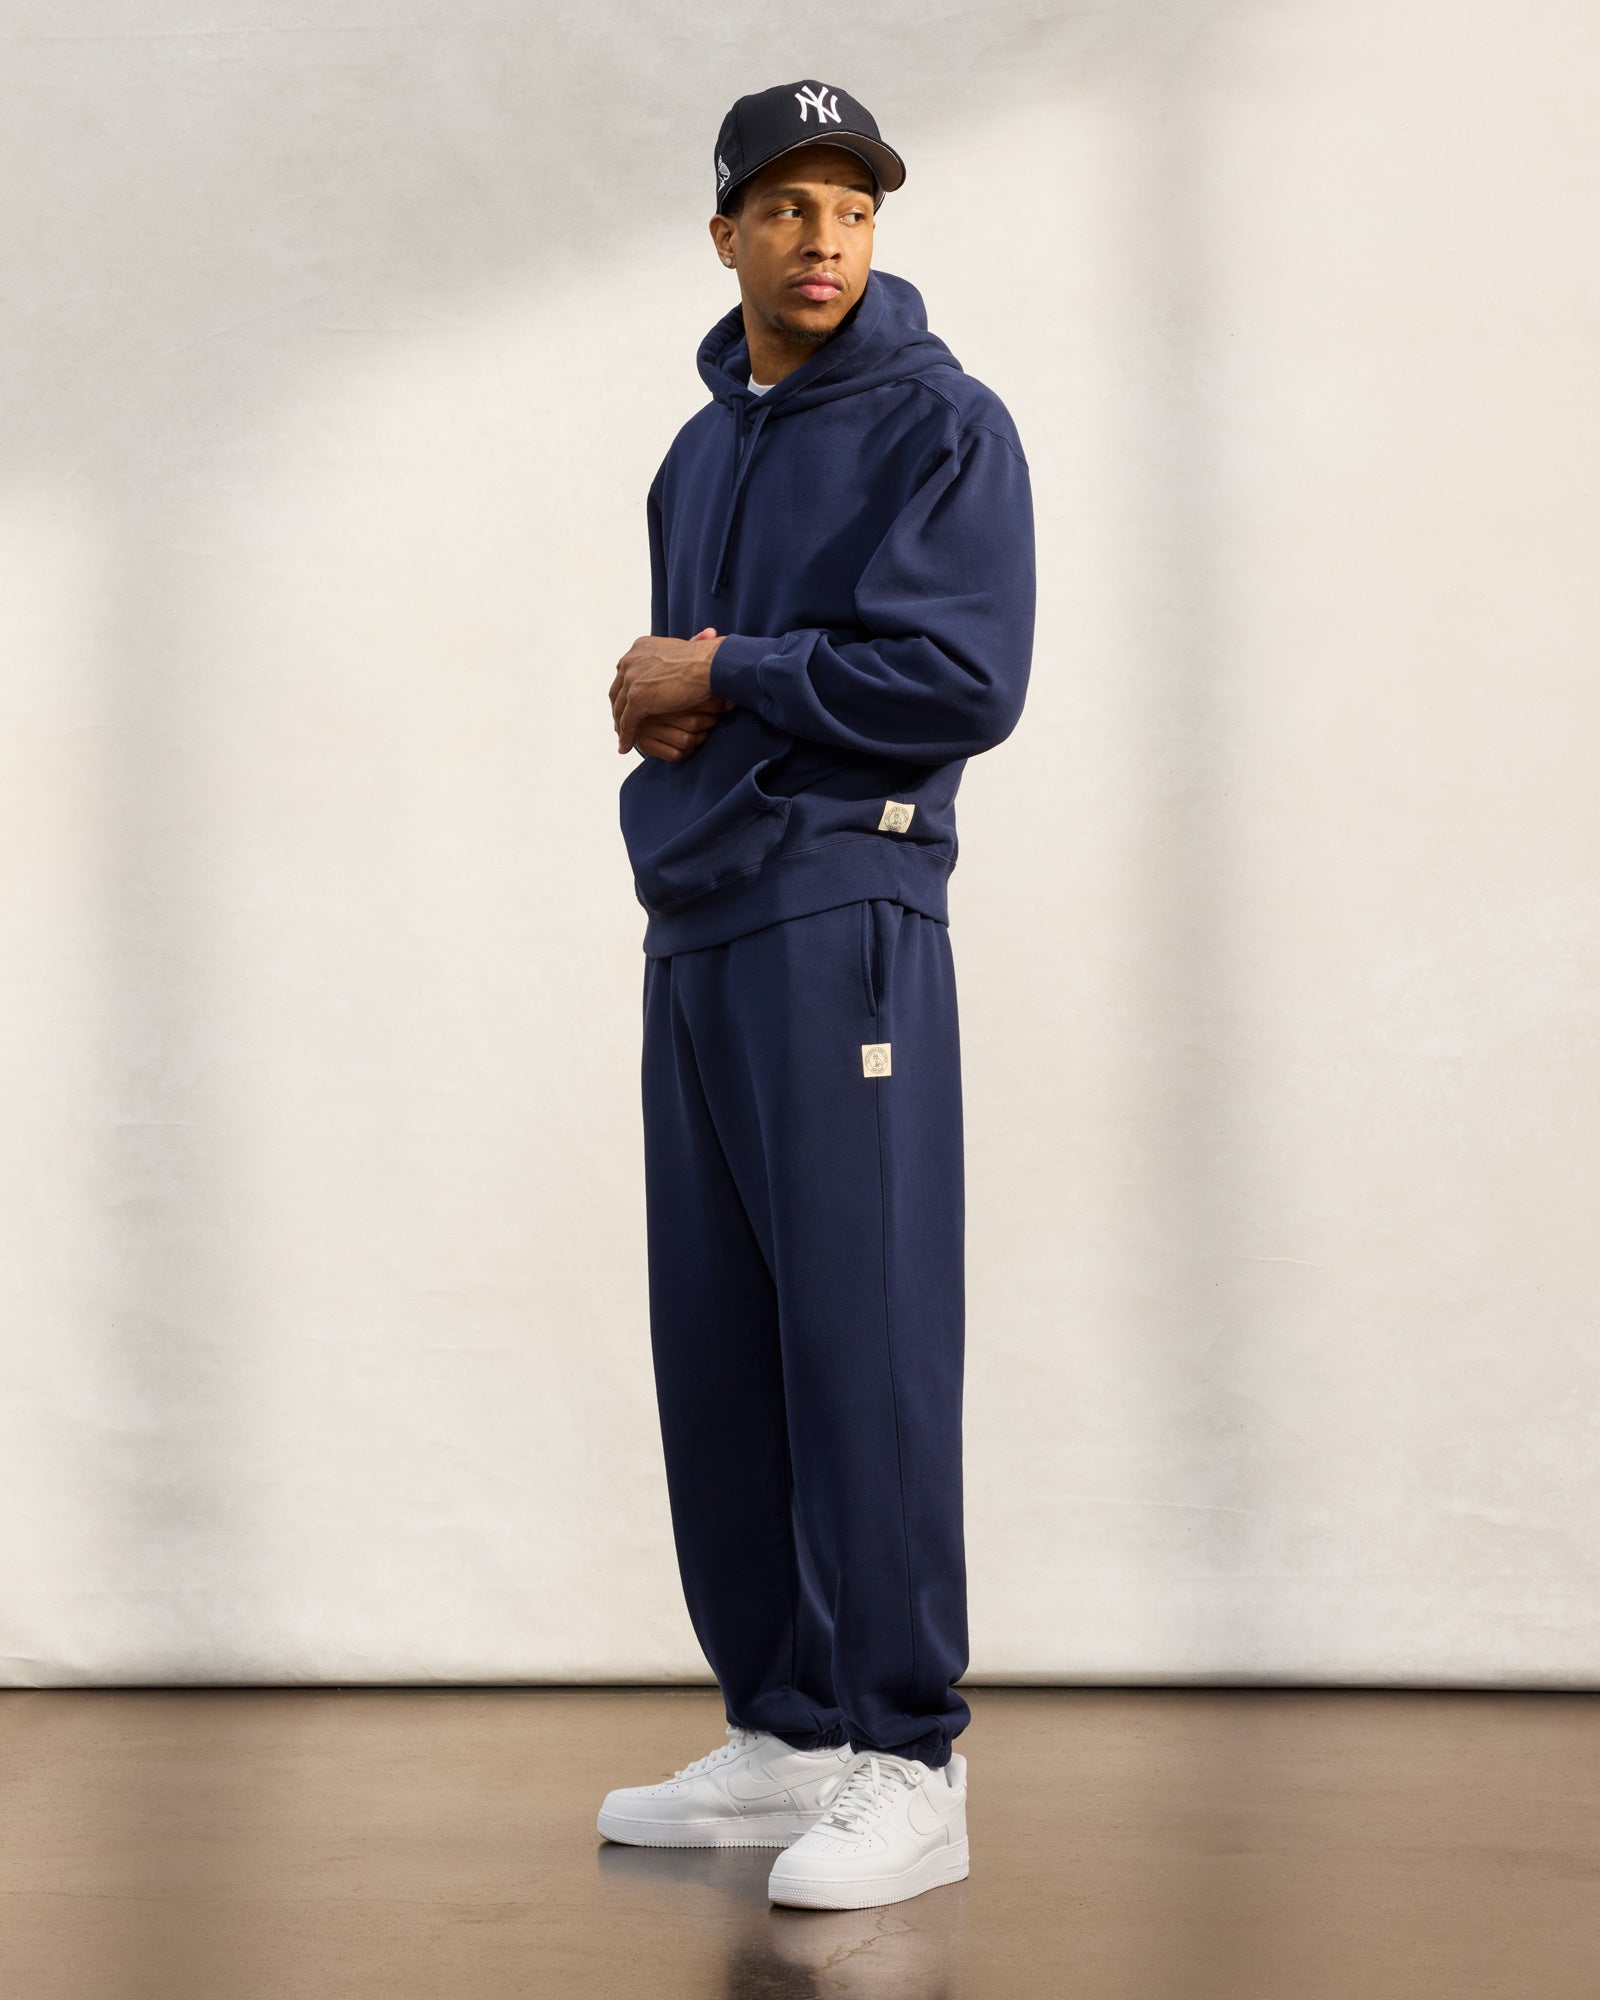 French Terry Relaxed Fit Sweatpant - Navy